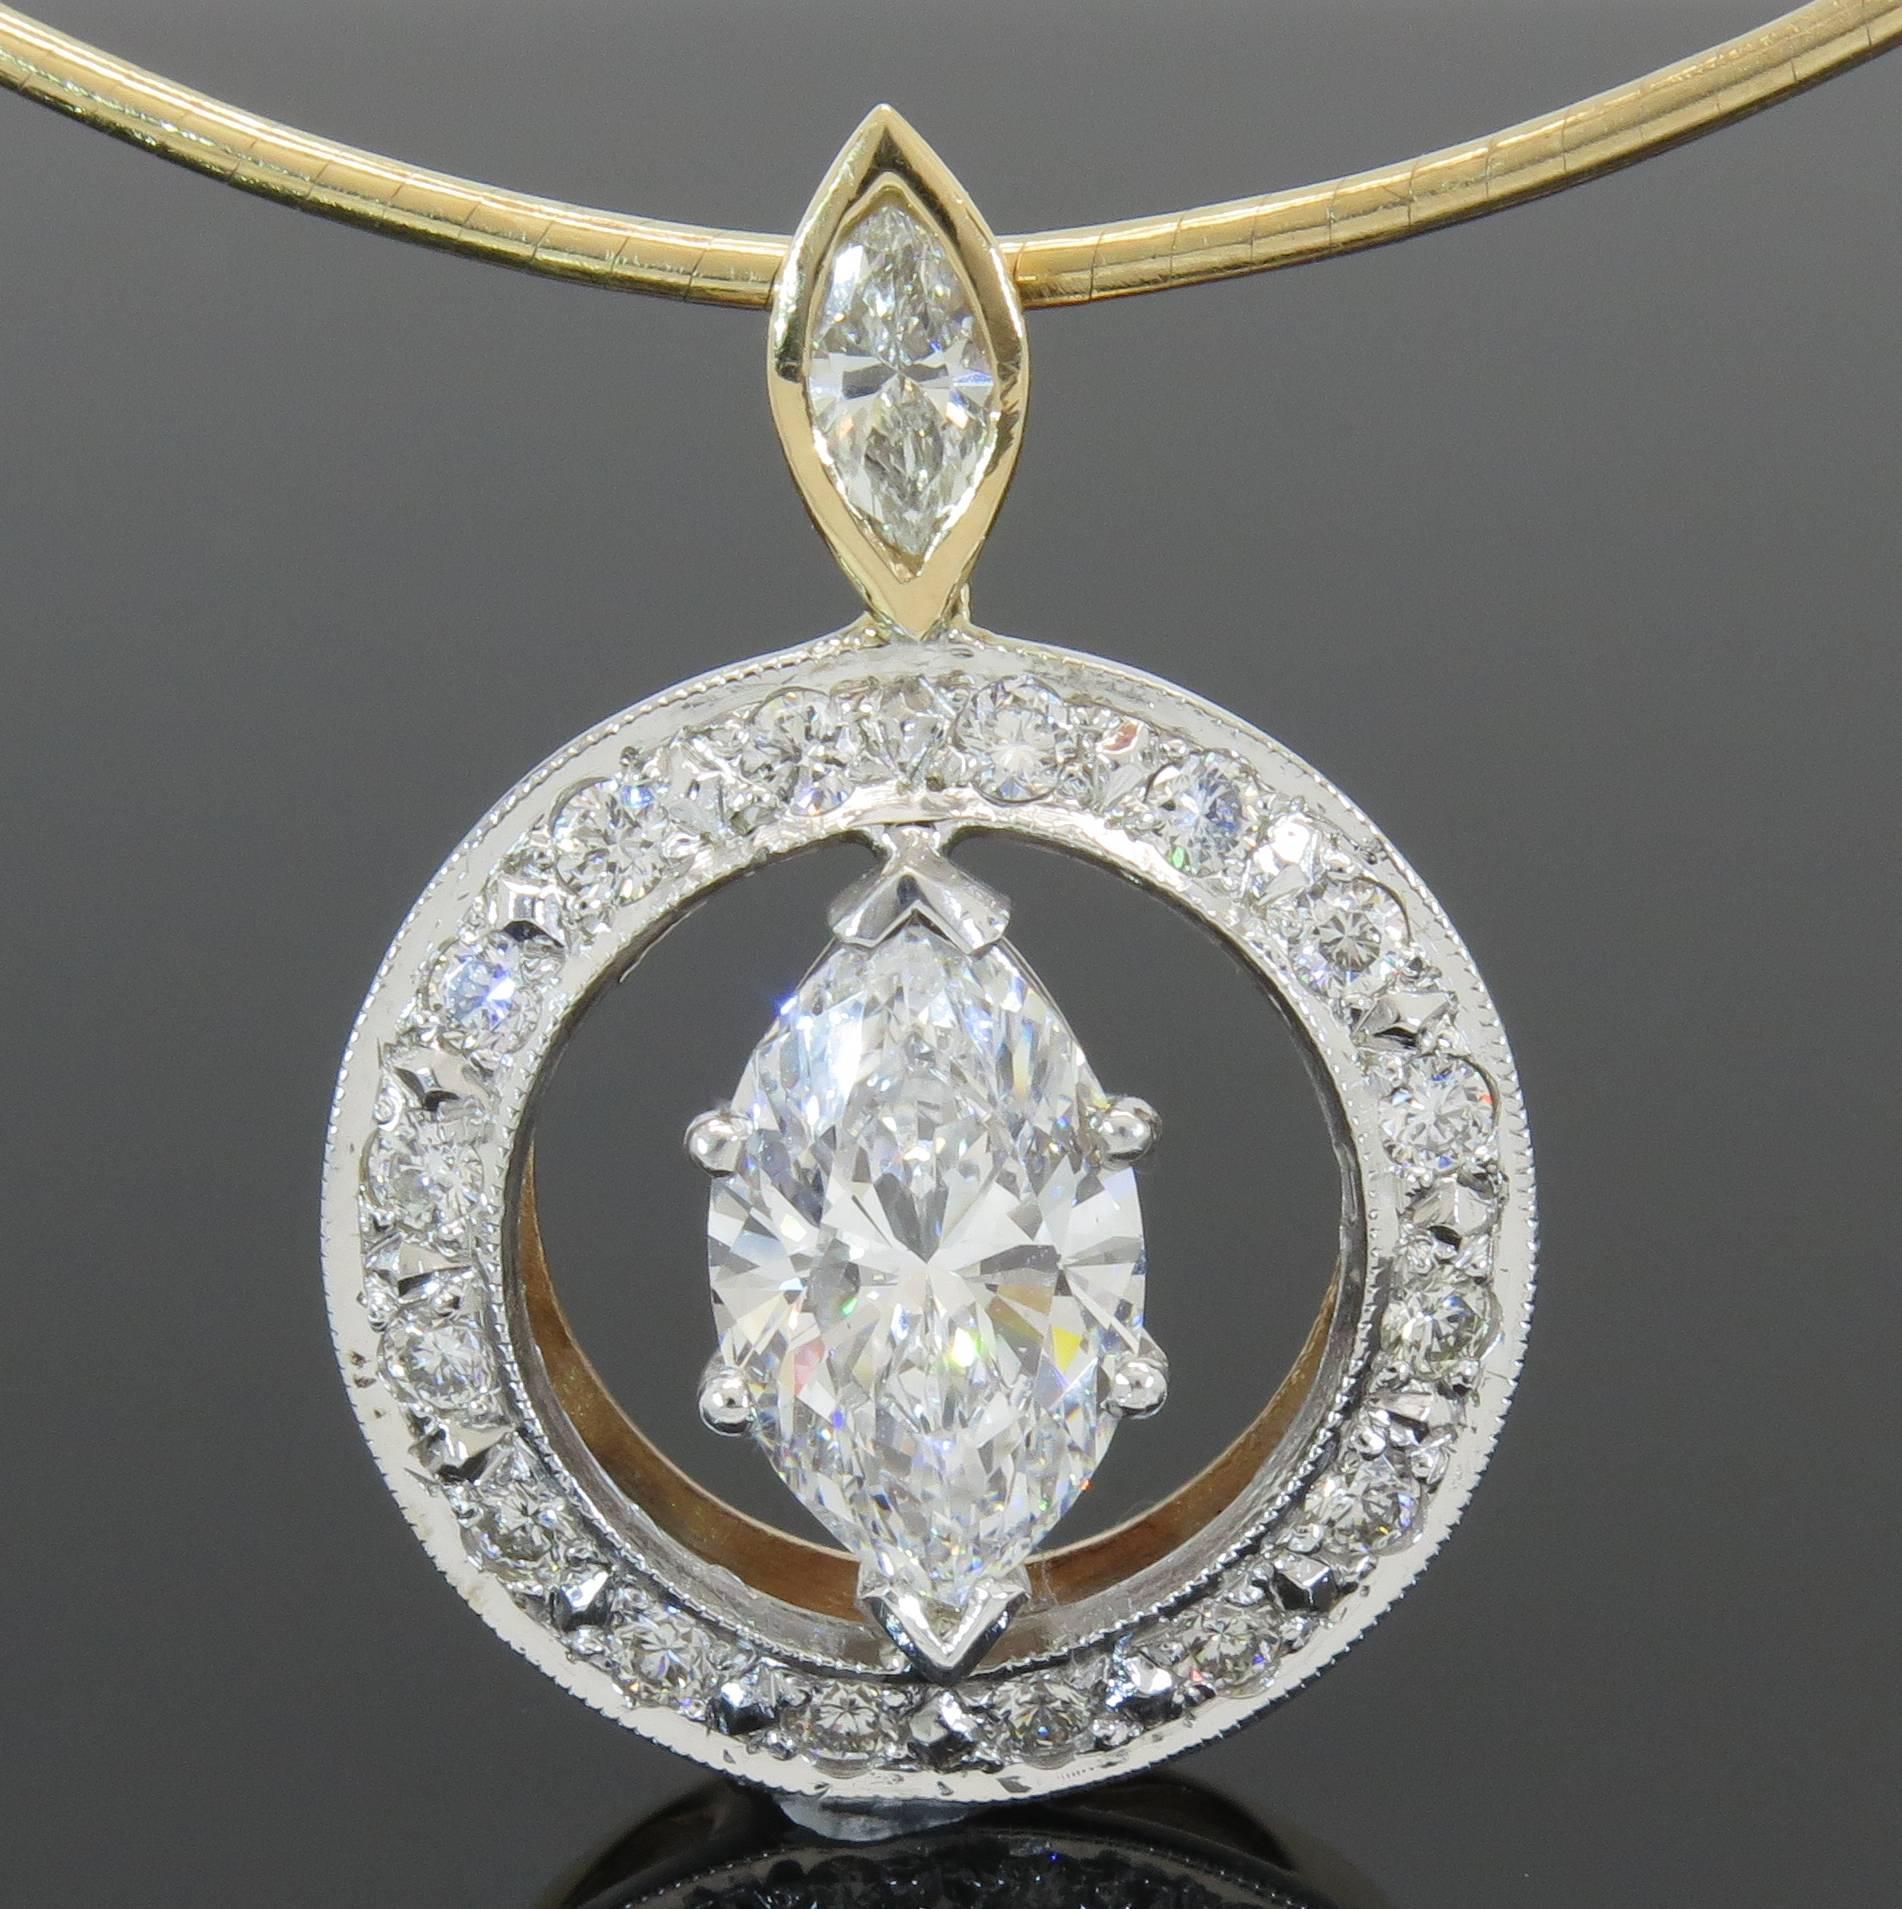 This one of a kind pendant features a stunning 2.01CT marquise center diamond, F-G/SI1 in quality. The pendant also features 16 round brilliant cut diamonds and one smaller marquise weighing 0.70 carats. The diamonds are set in a circle style. The